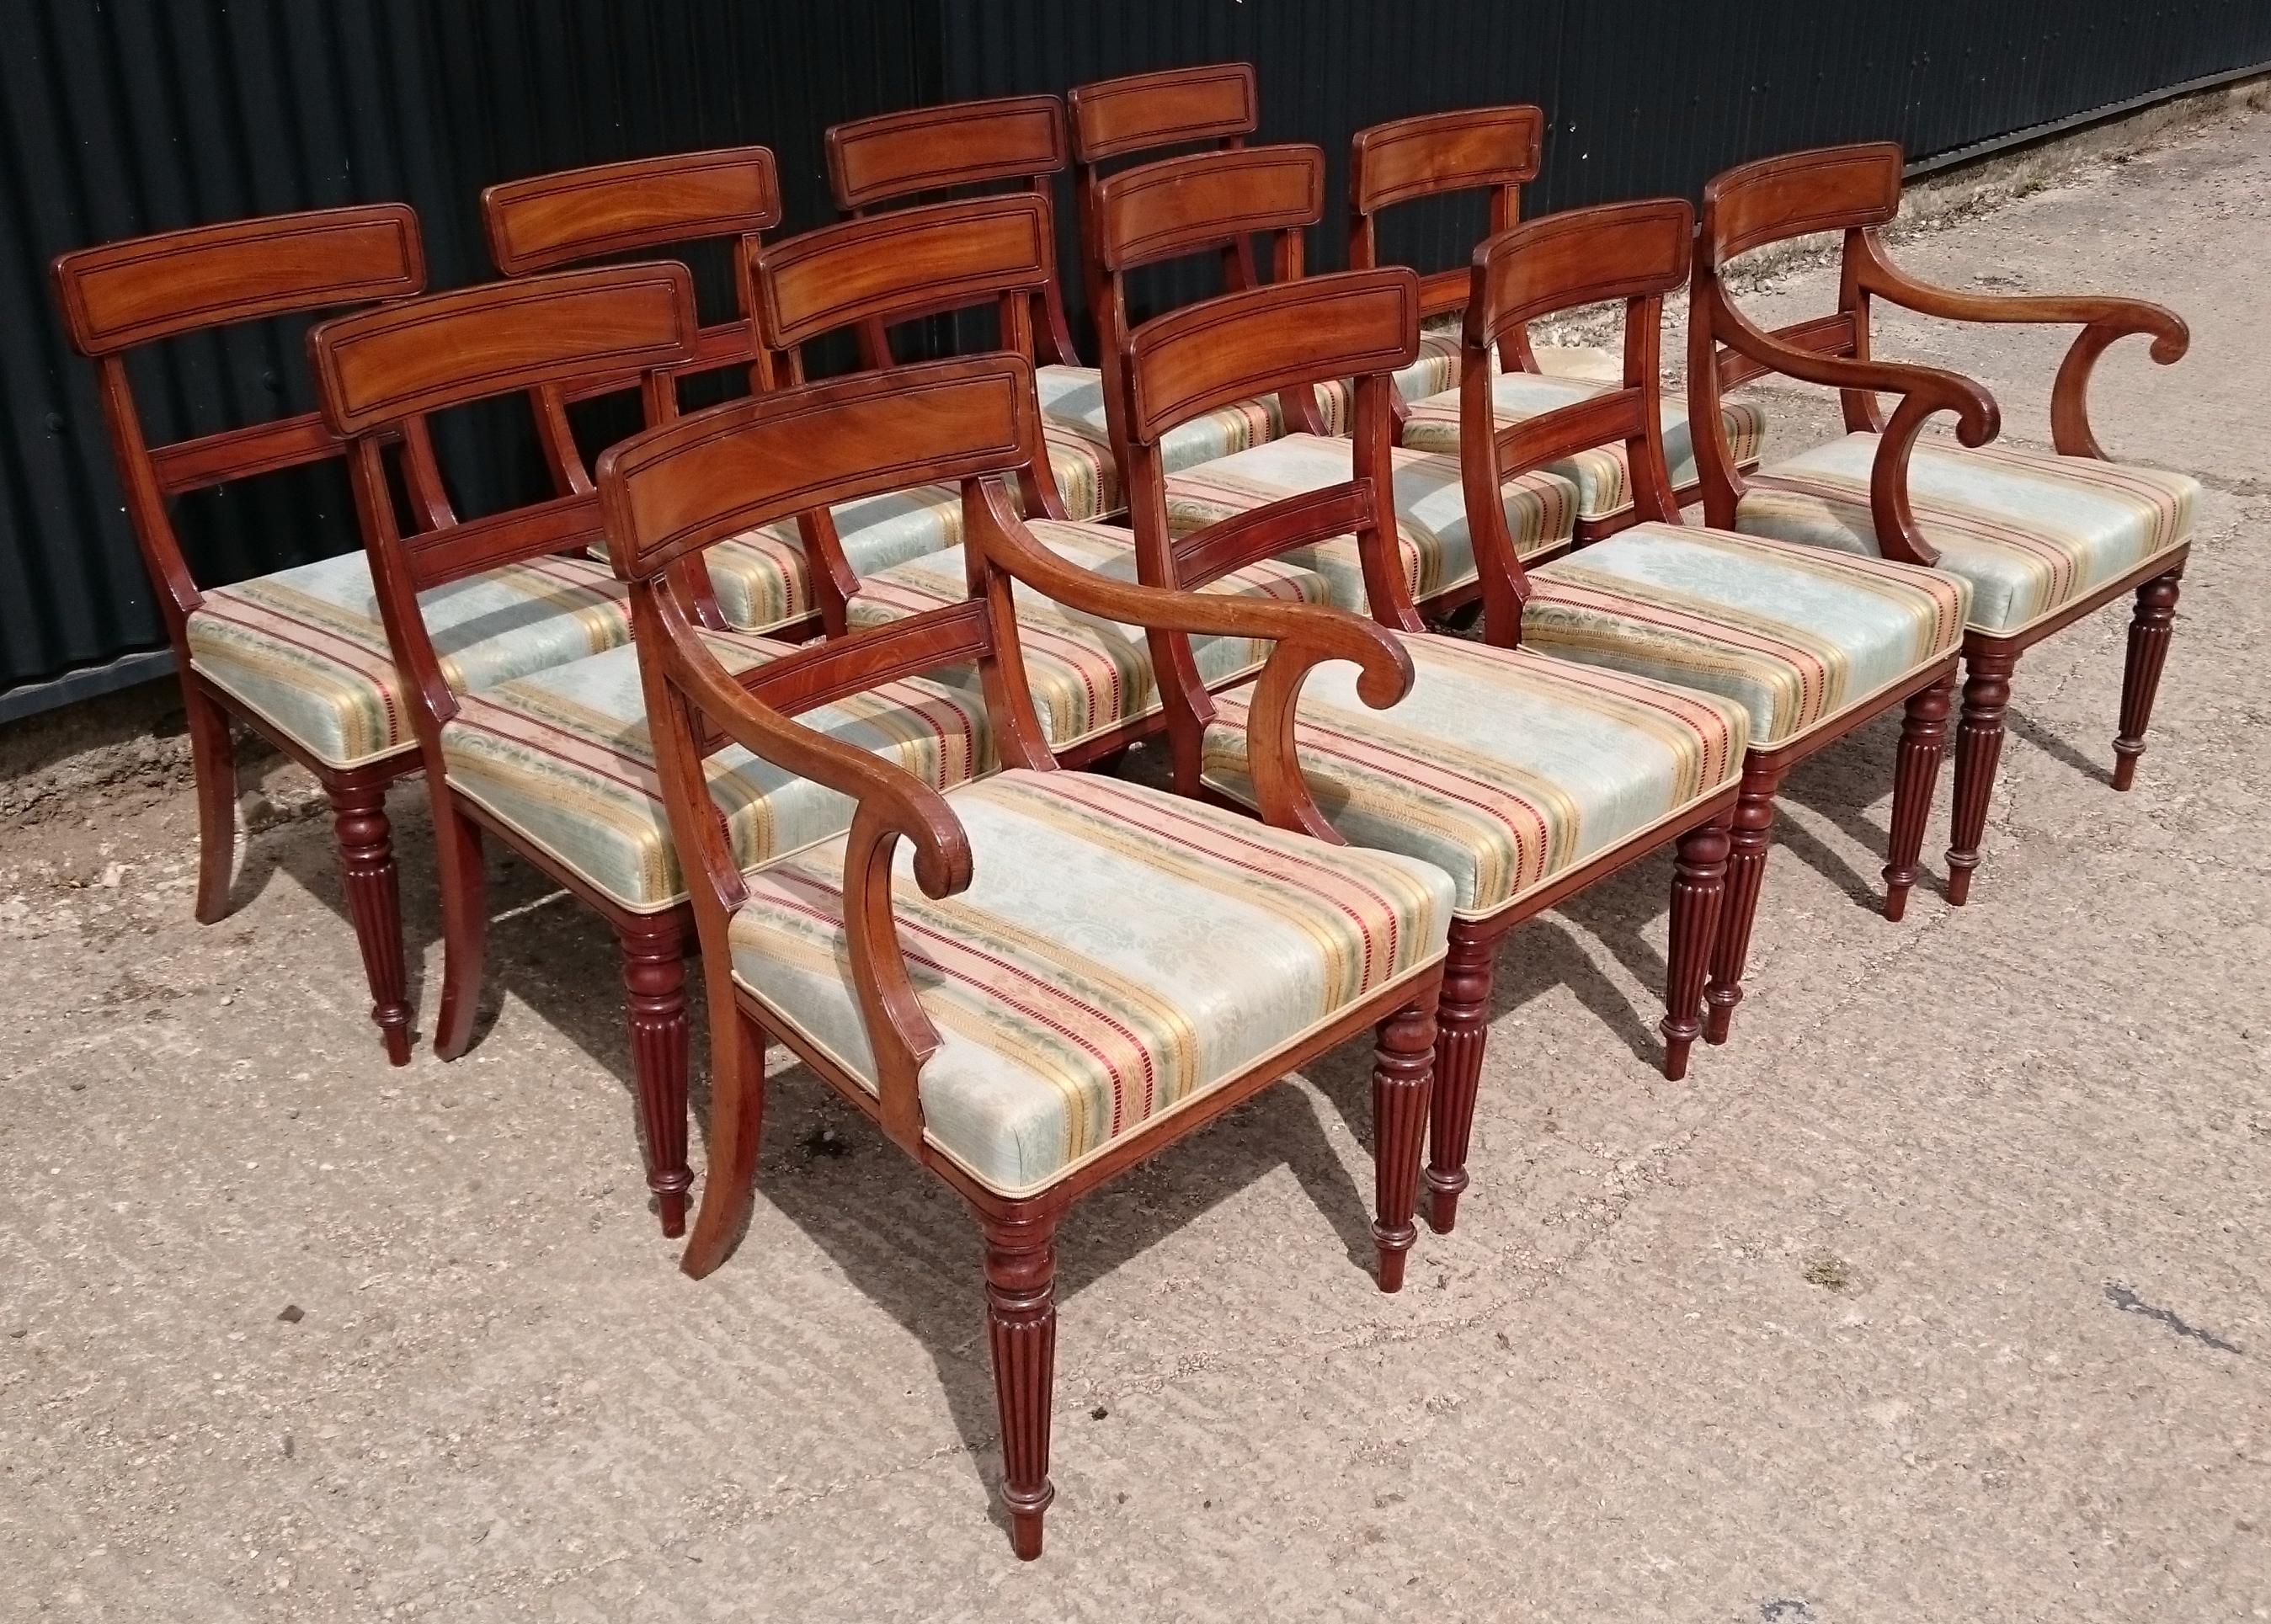 Very fine quality set of twelve Regency mahogany antique dining chairs. This set of chairs are generously proportioned for the period, the seats are deep and the back leg has a generous curve. The design of the leg and the design of the back splat